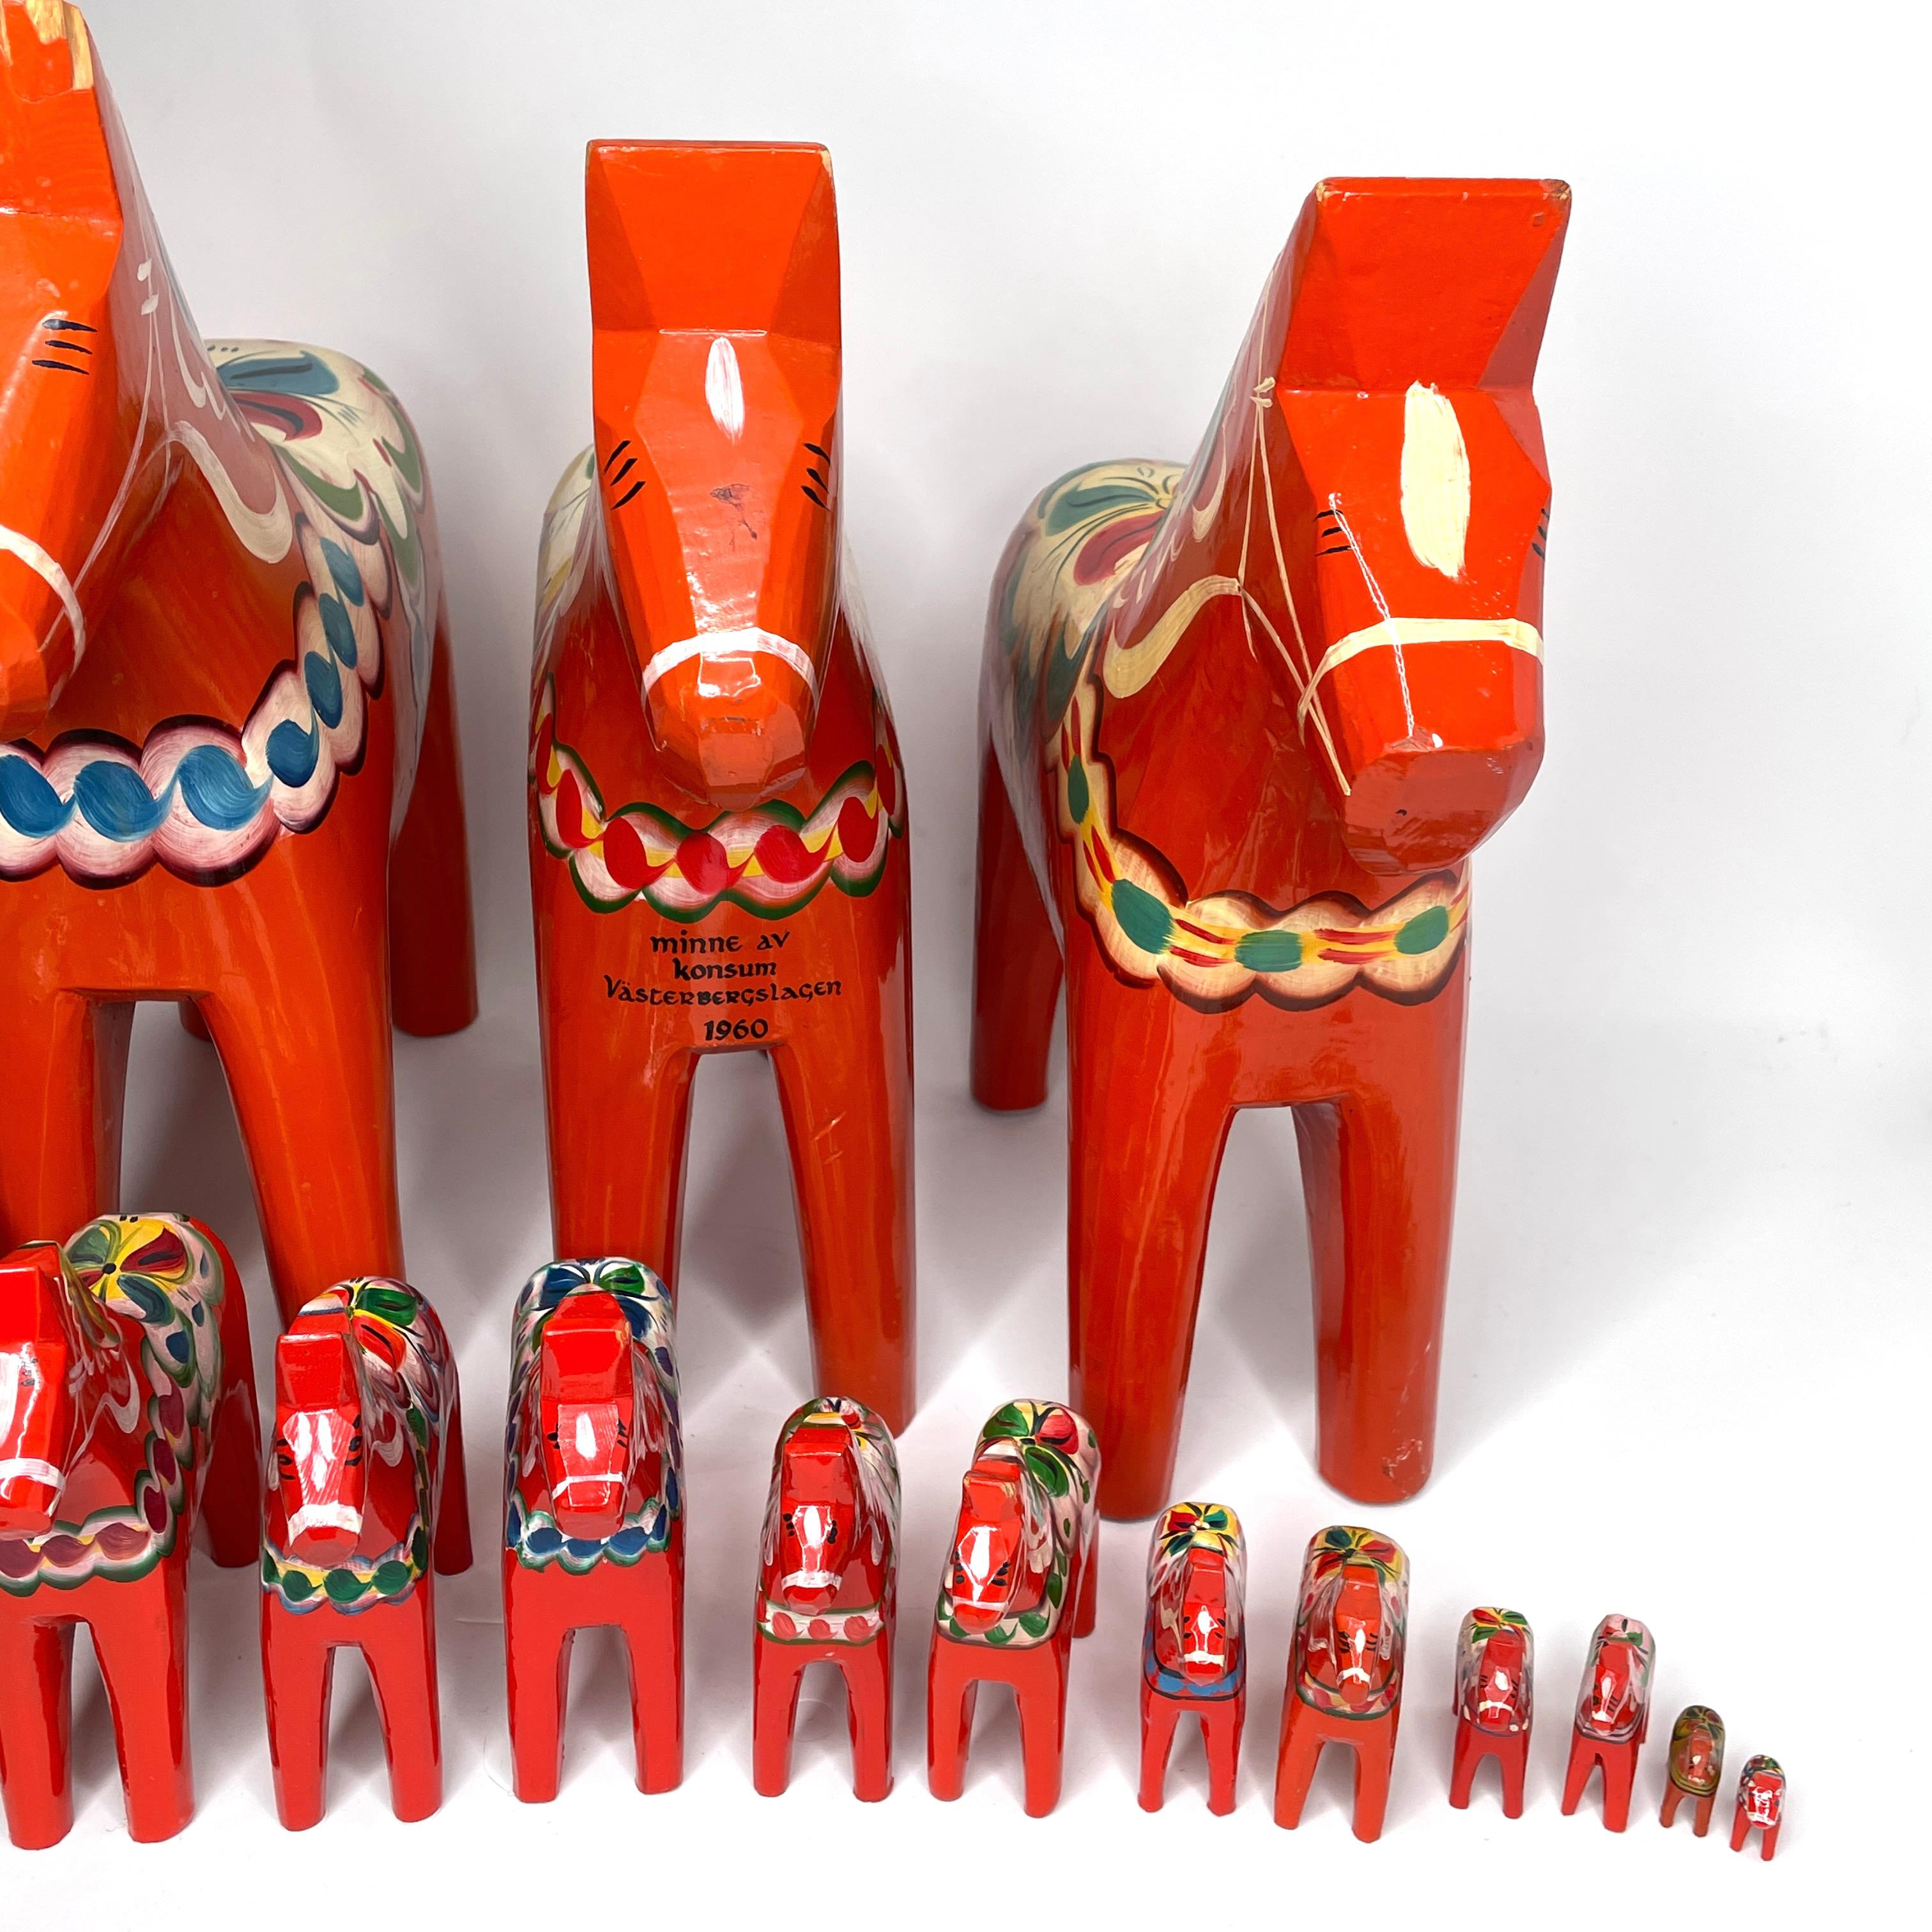 This offer is for a collection of eighteen Swedish Dala horses by Nils Olsson. These are hand carved painted wood. The largest one is approximate 16 1/2